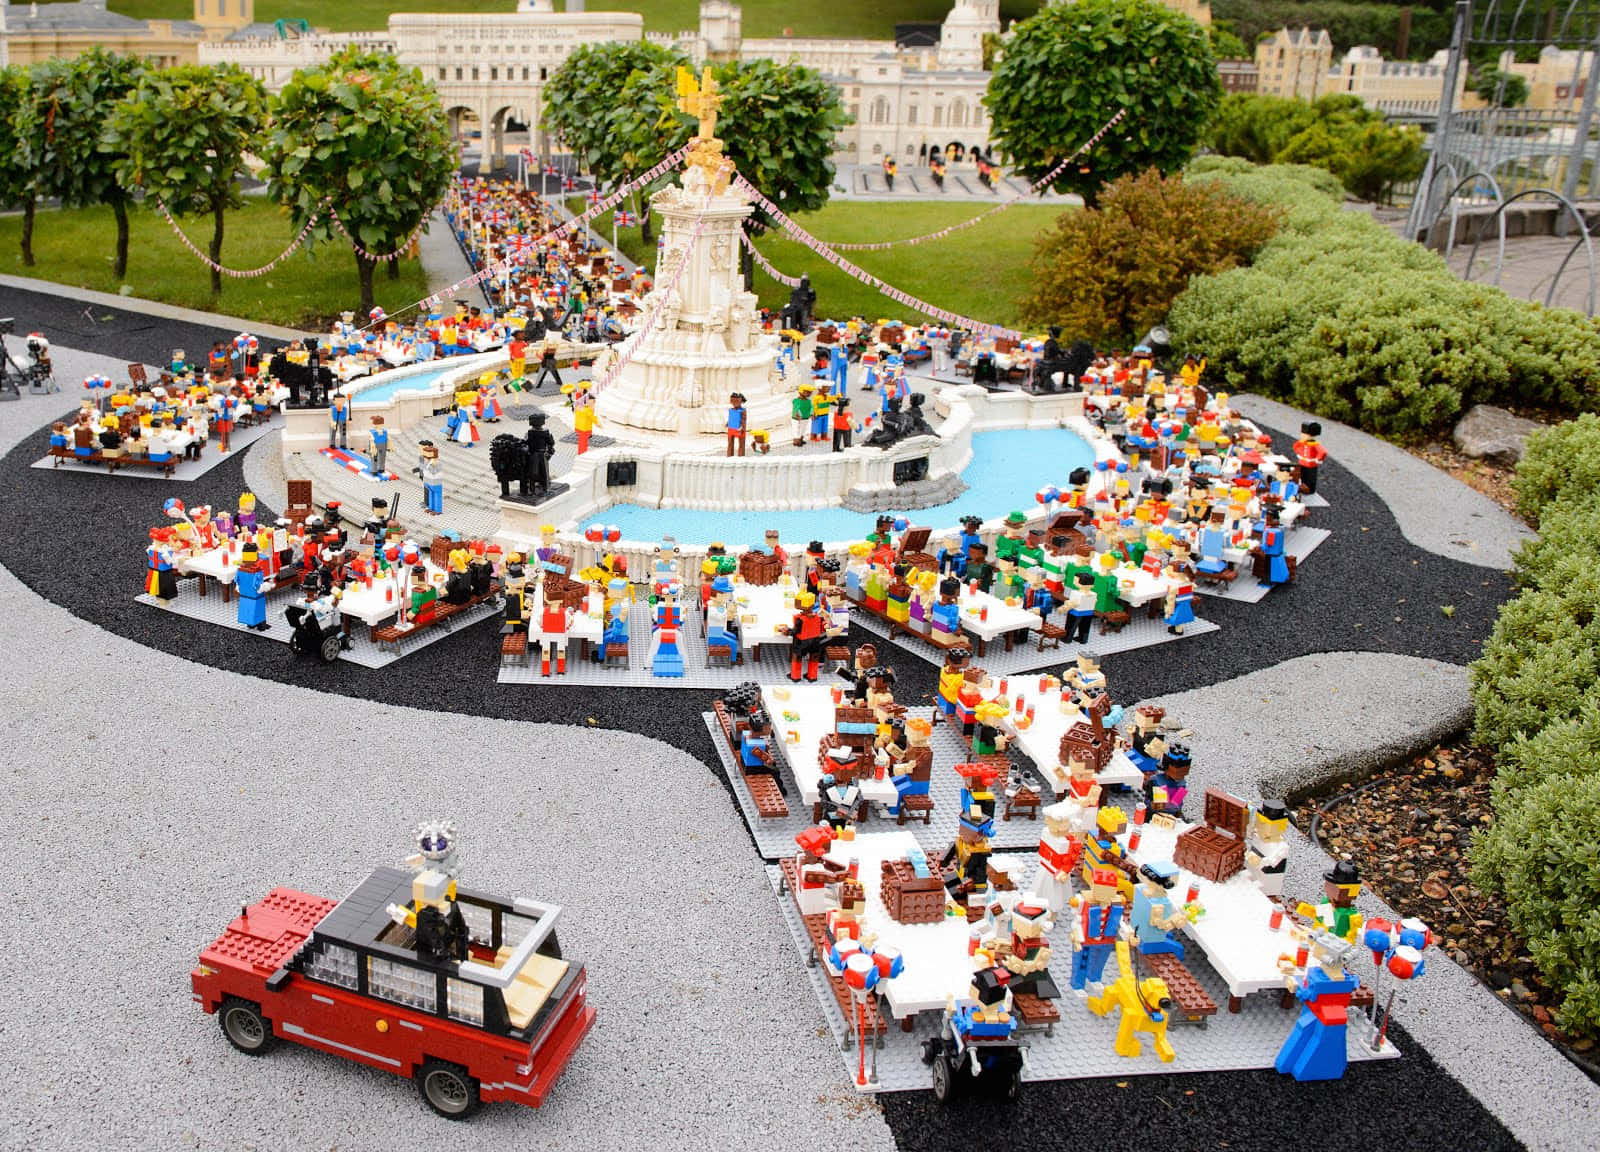 Welcome to Legoland, where Every Day is a Magical Adventure!